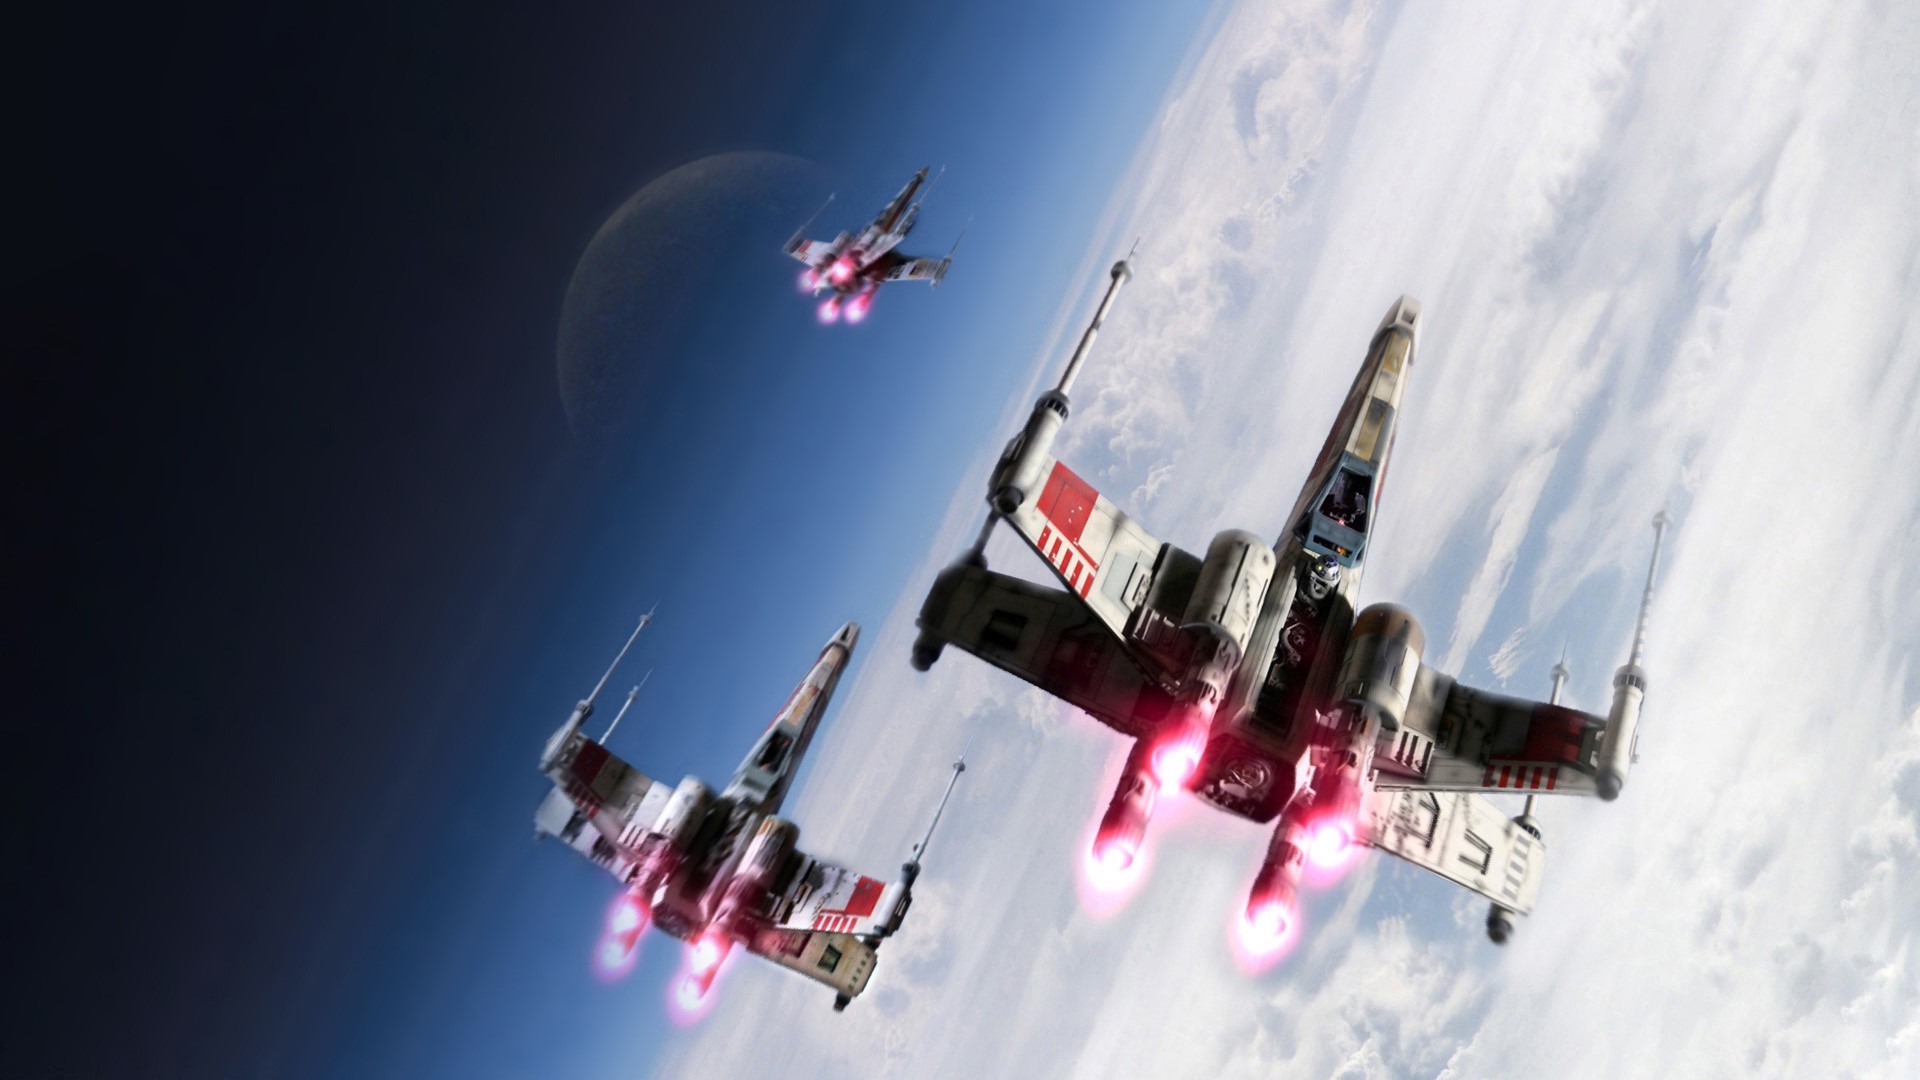 1920x1080 Star Wars Force Awakens XWing Wallpaper by HD Wallpapers Daily 1920Ã1080 X  Wing Wallpaper